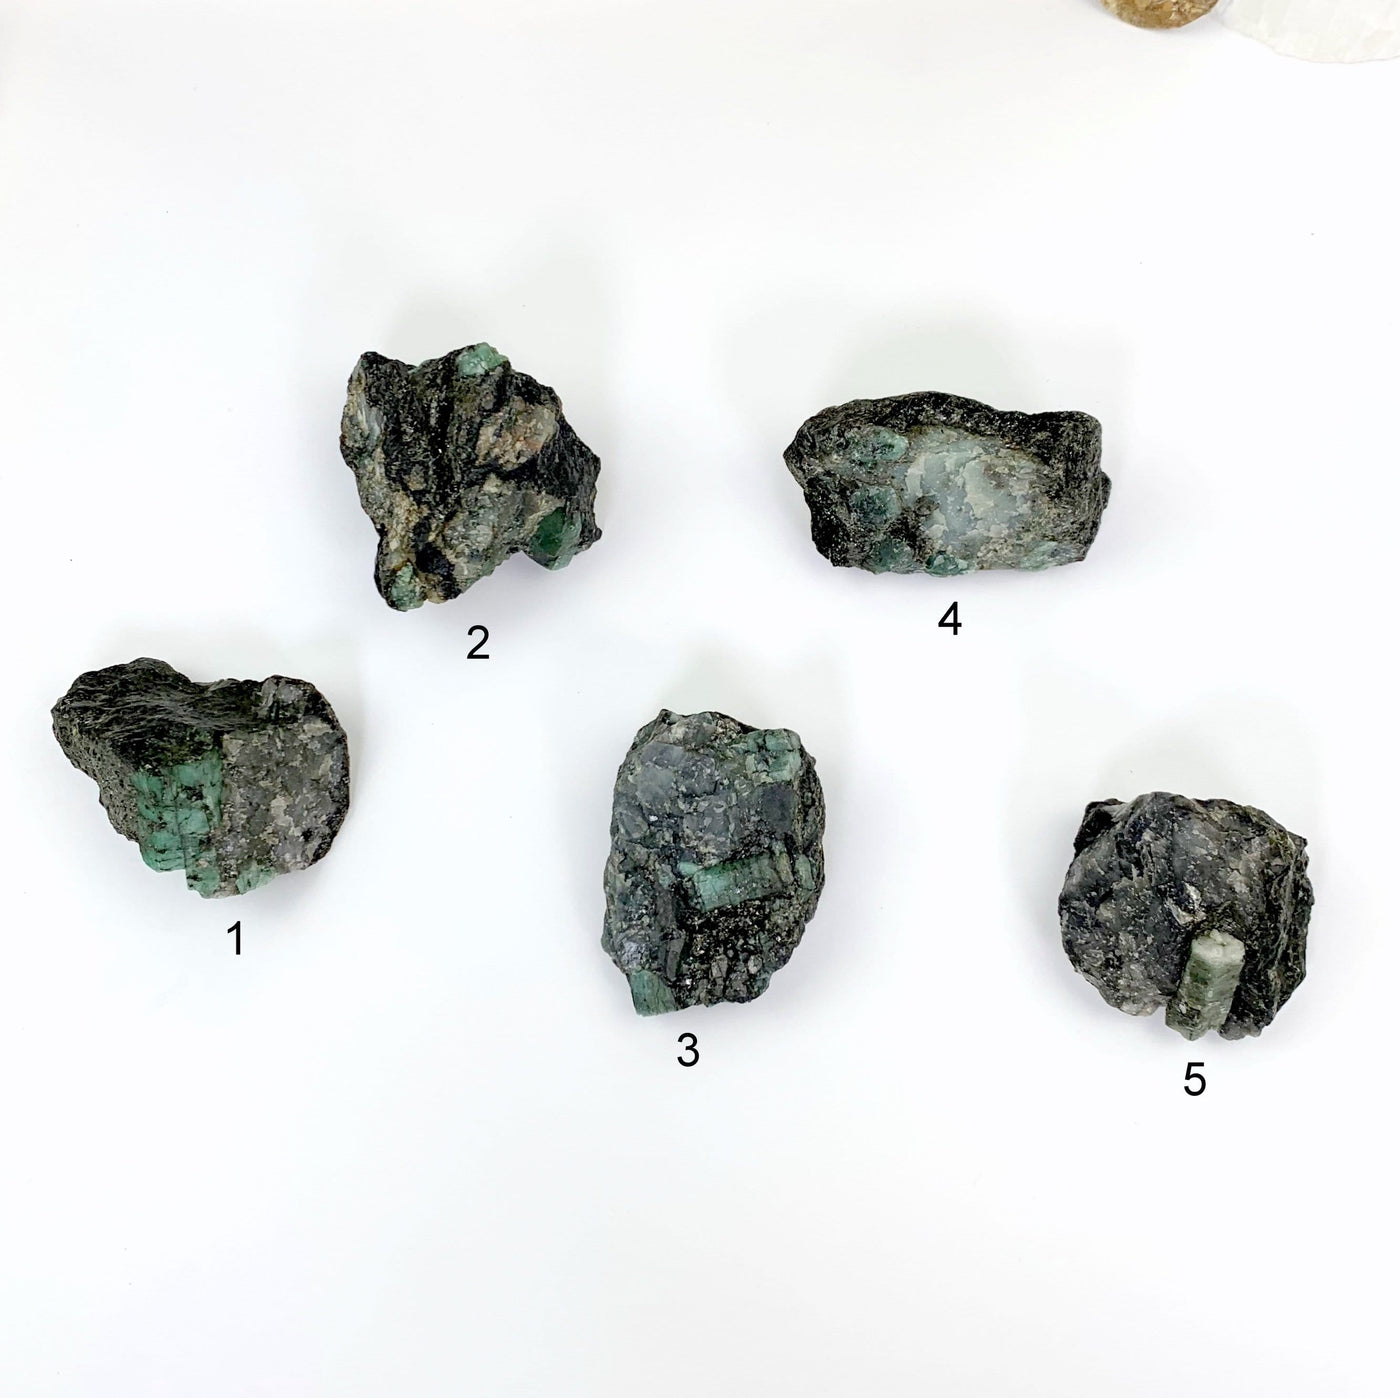 All five pieces of emerald on a white background and labeled with a number